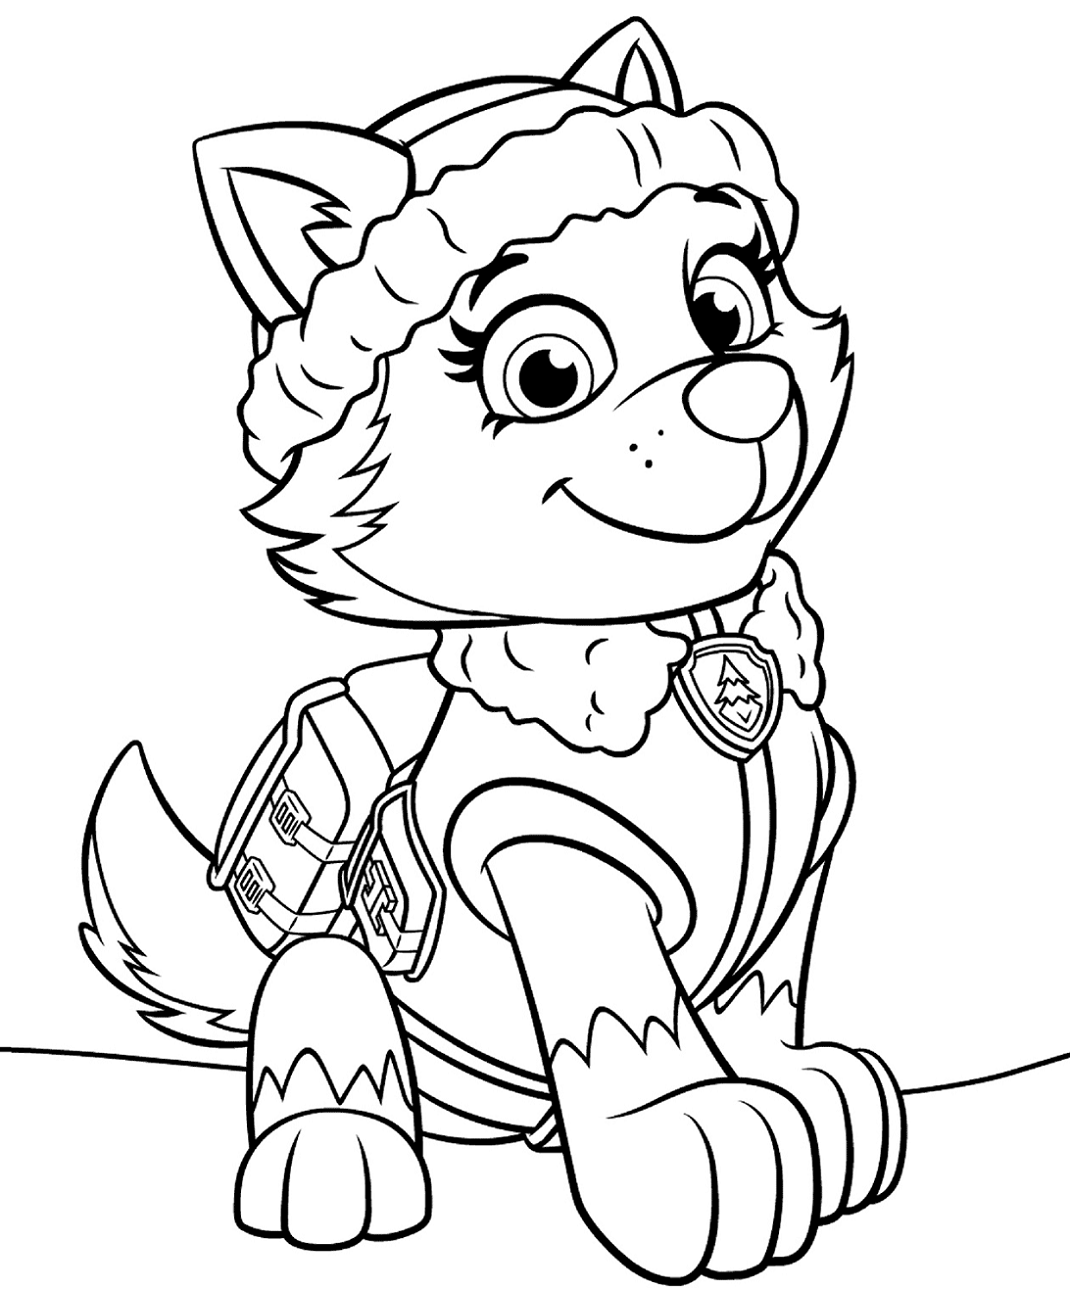 Everest Paw Patrol Coloring Pages - Free Printable Coloring for Kids